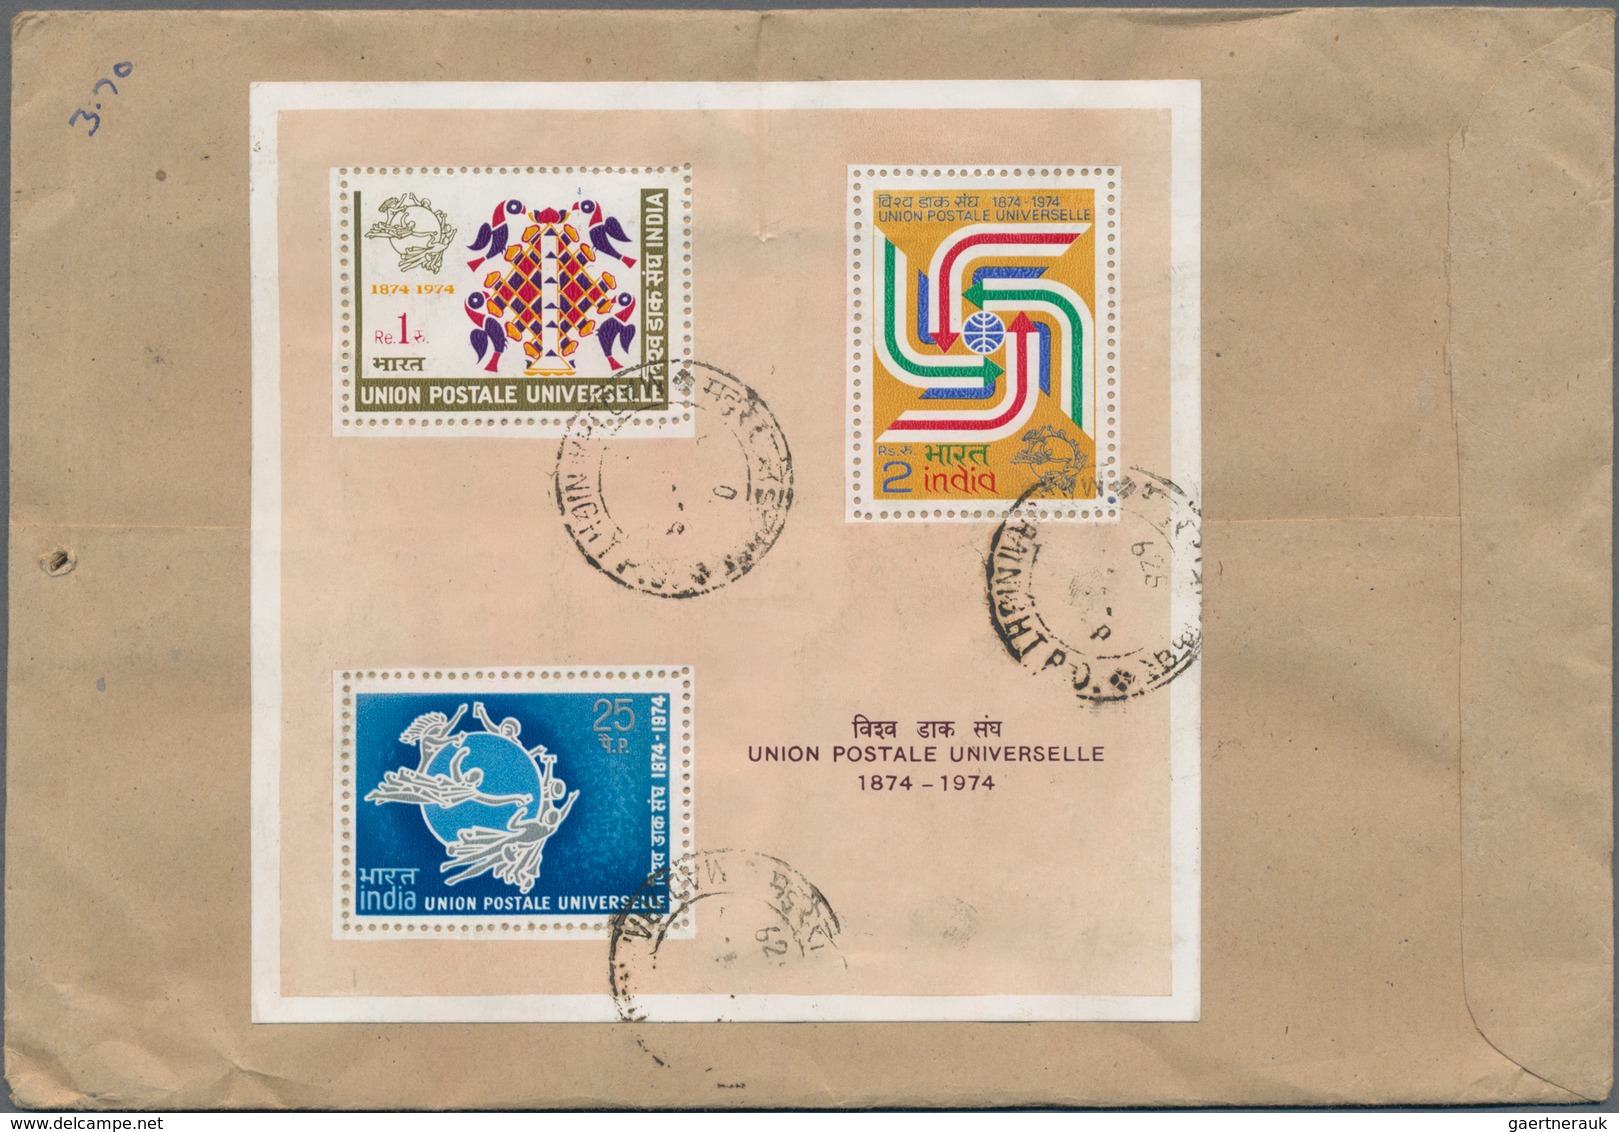 Indien: 1970's-1990's: About 120 Covers, Postcards And FDCs, Many Sent To Europe, With Some Good Fra - 1854 Britse Indische Compagnie